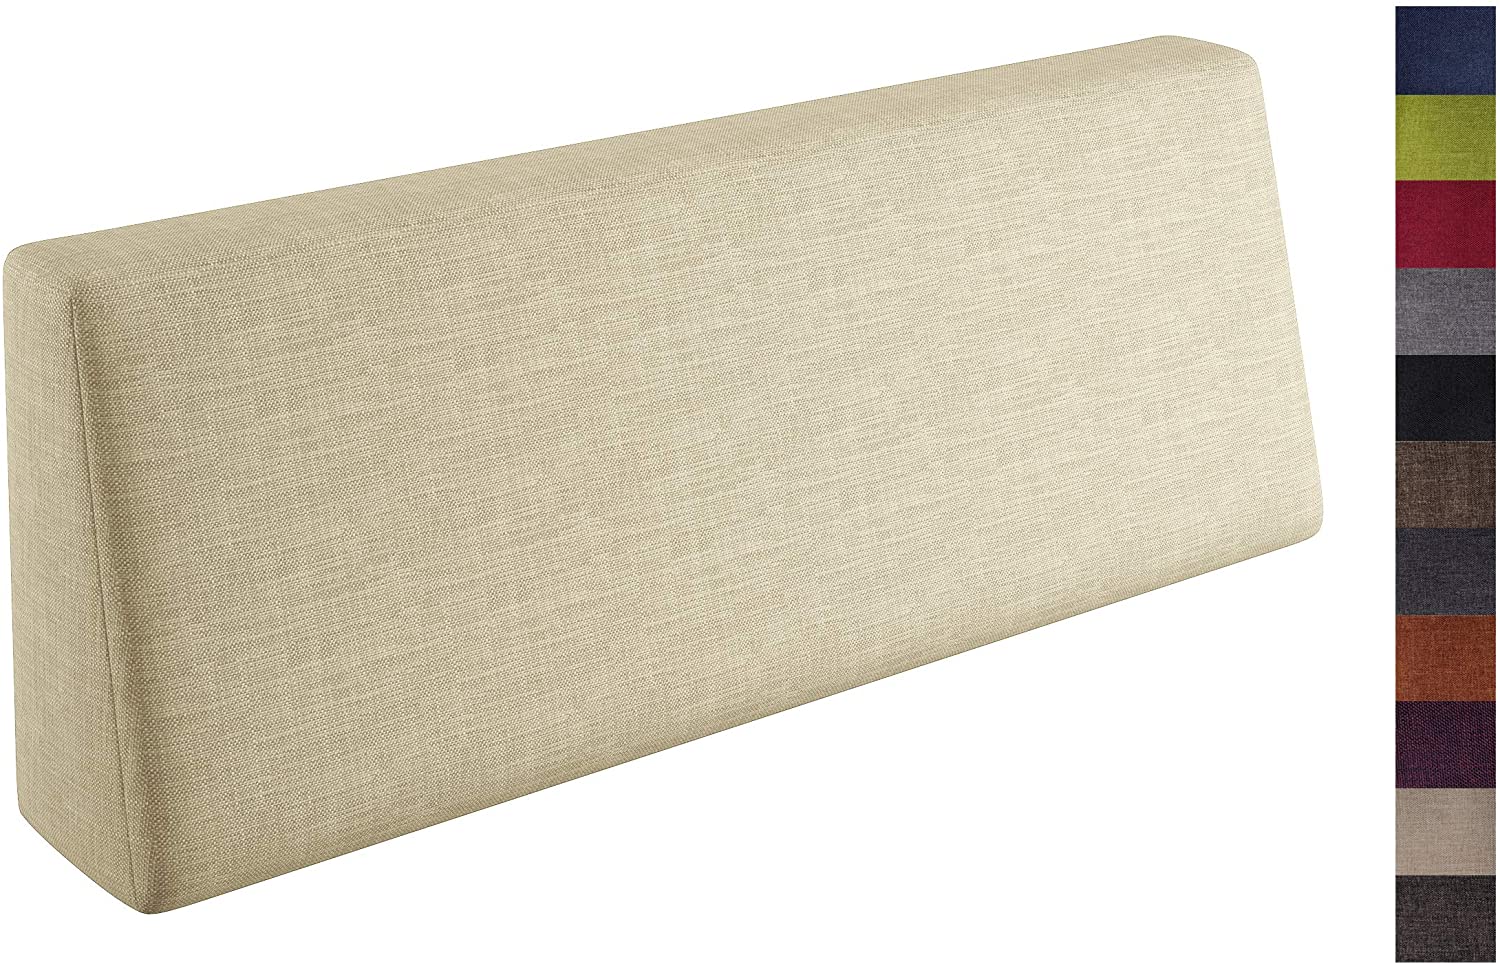 Sunnypillow Pallet Cushion With Removable Cover Cold Foam Pallet Cushion Pa